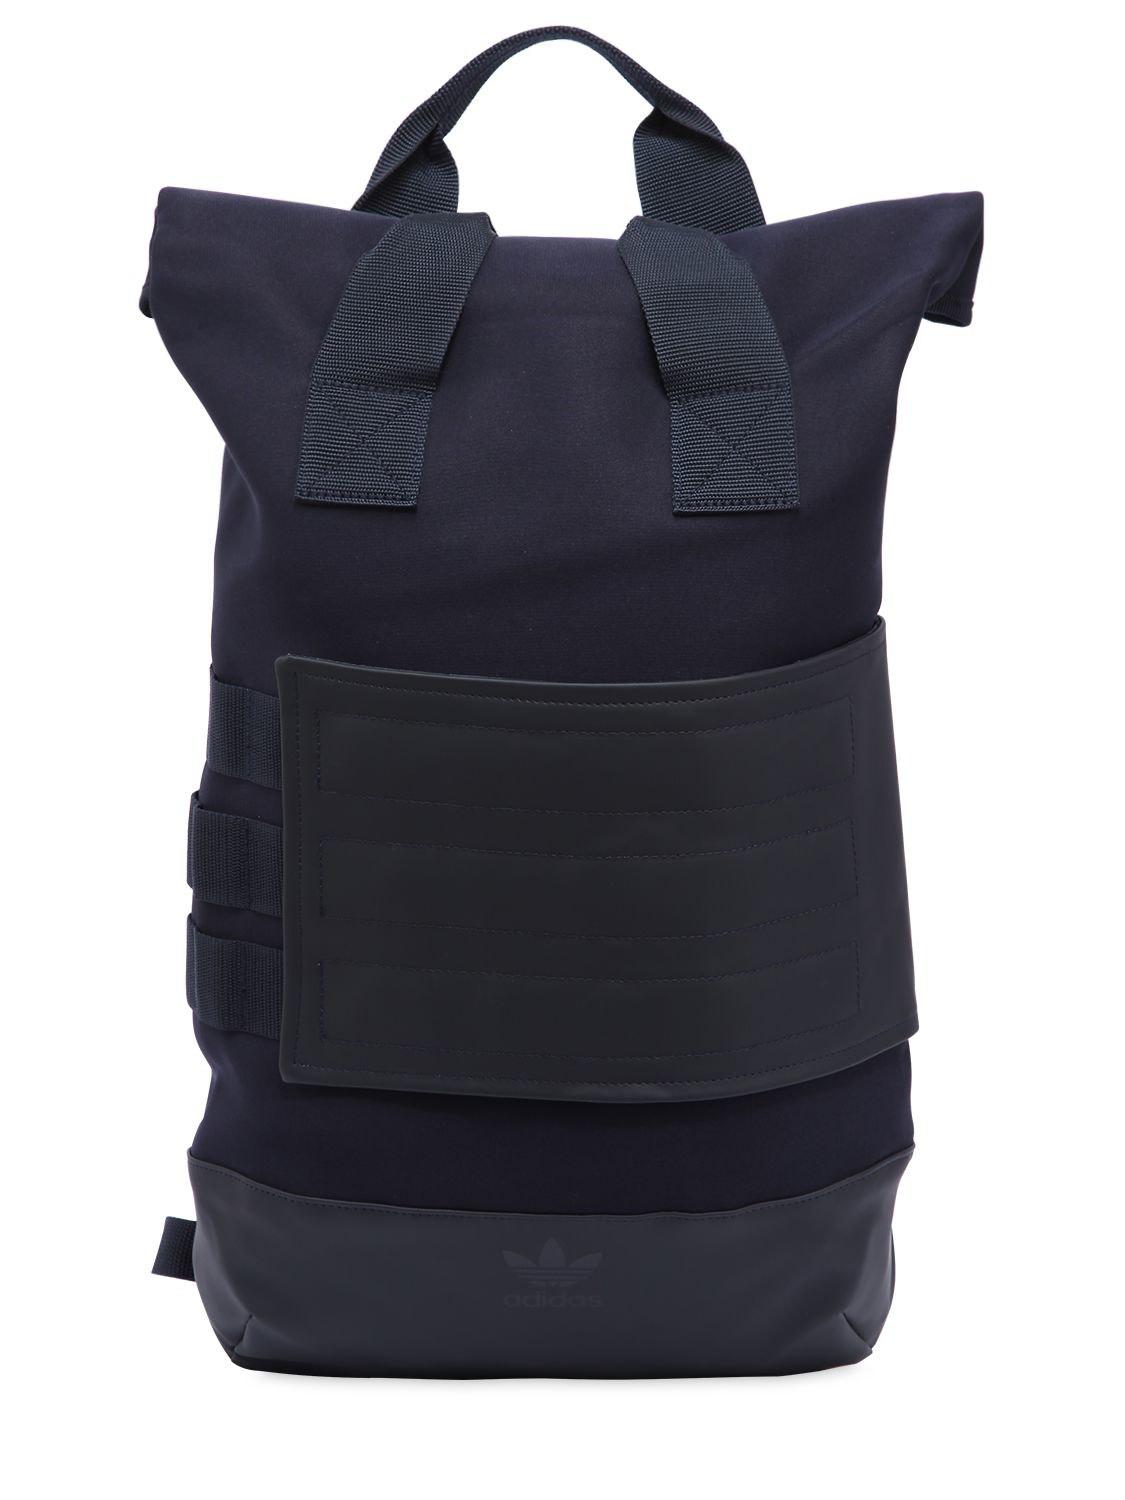 adidas Originals Roll Top Backpack in Blue for Men - Lyst